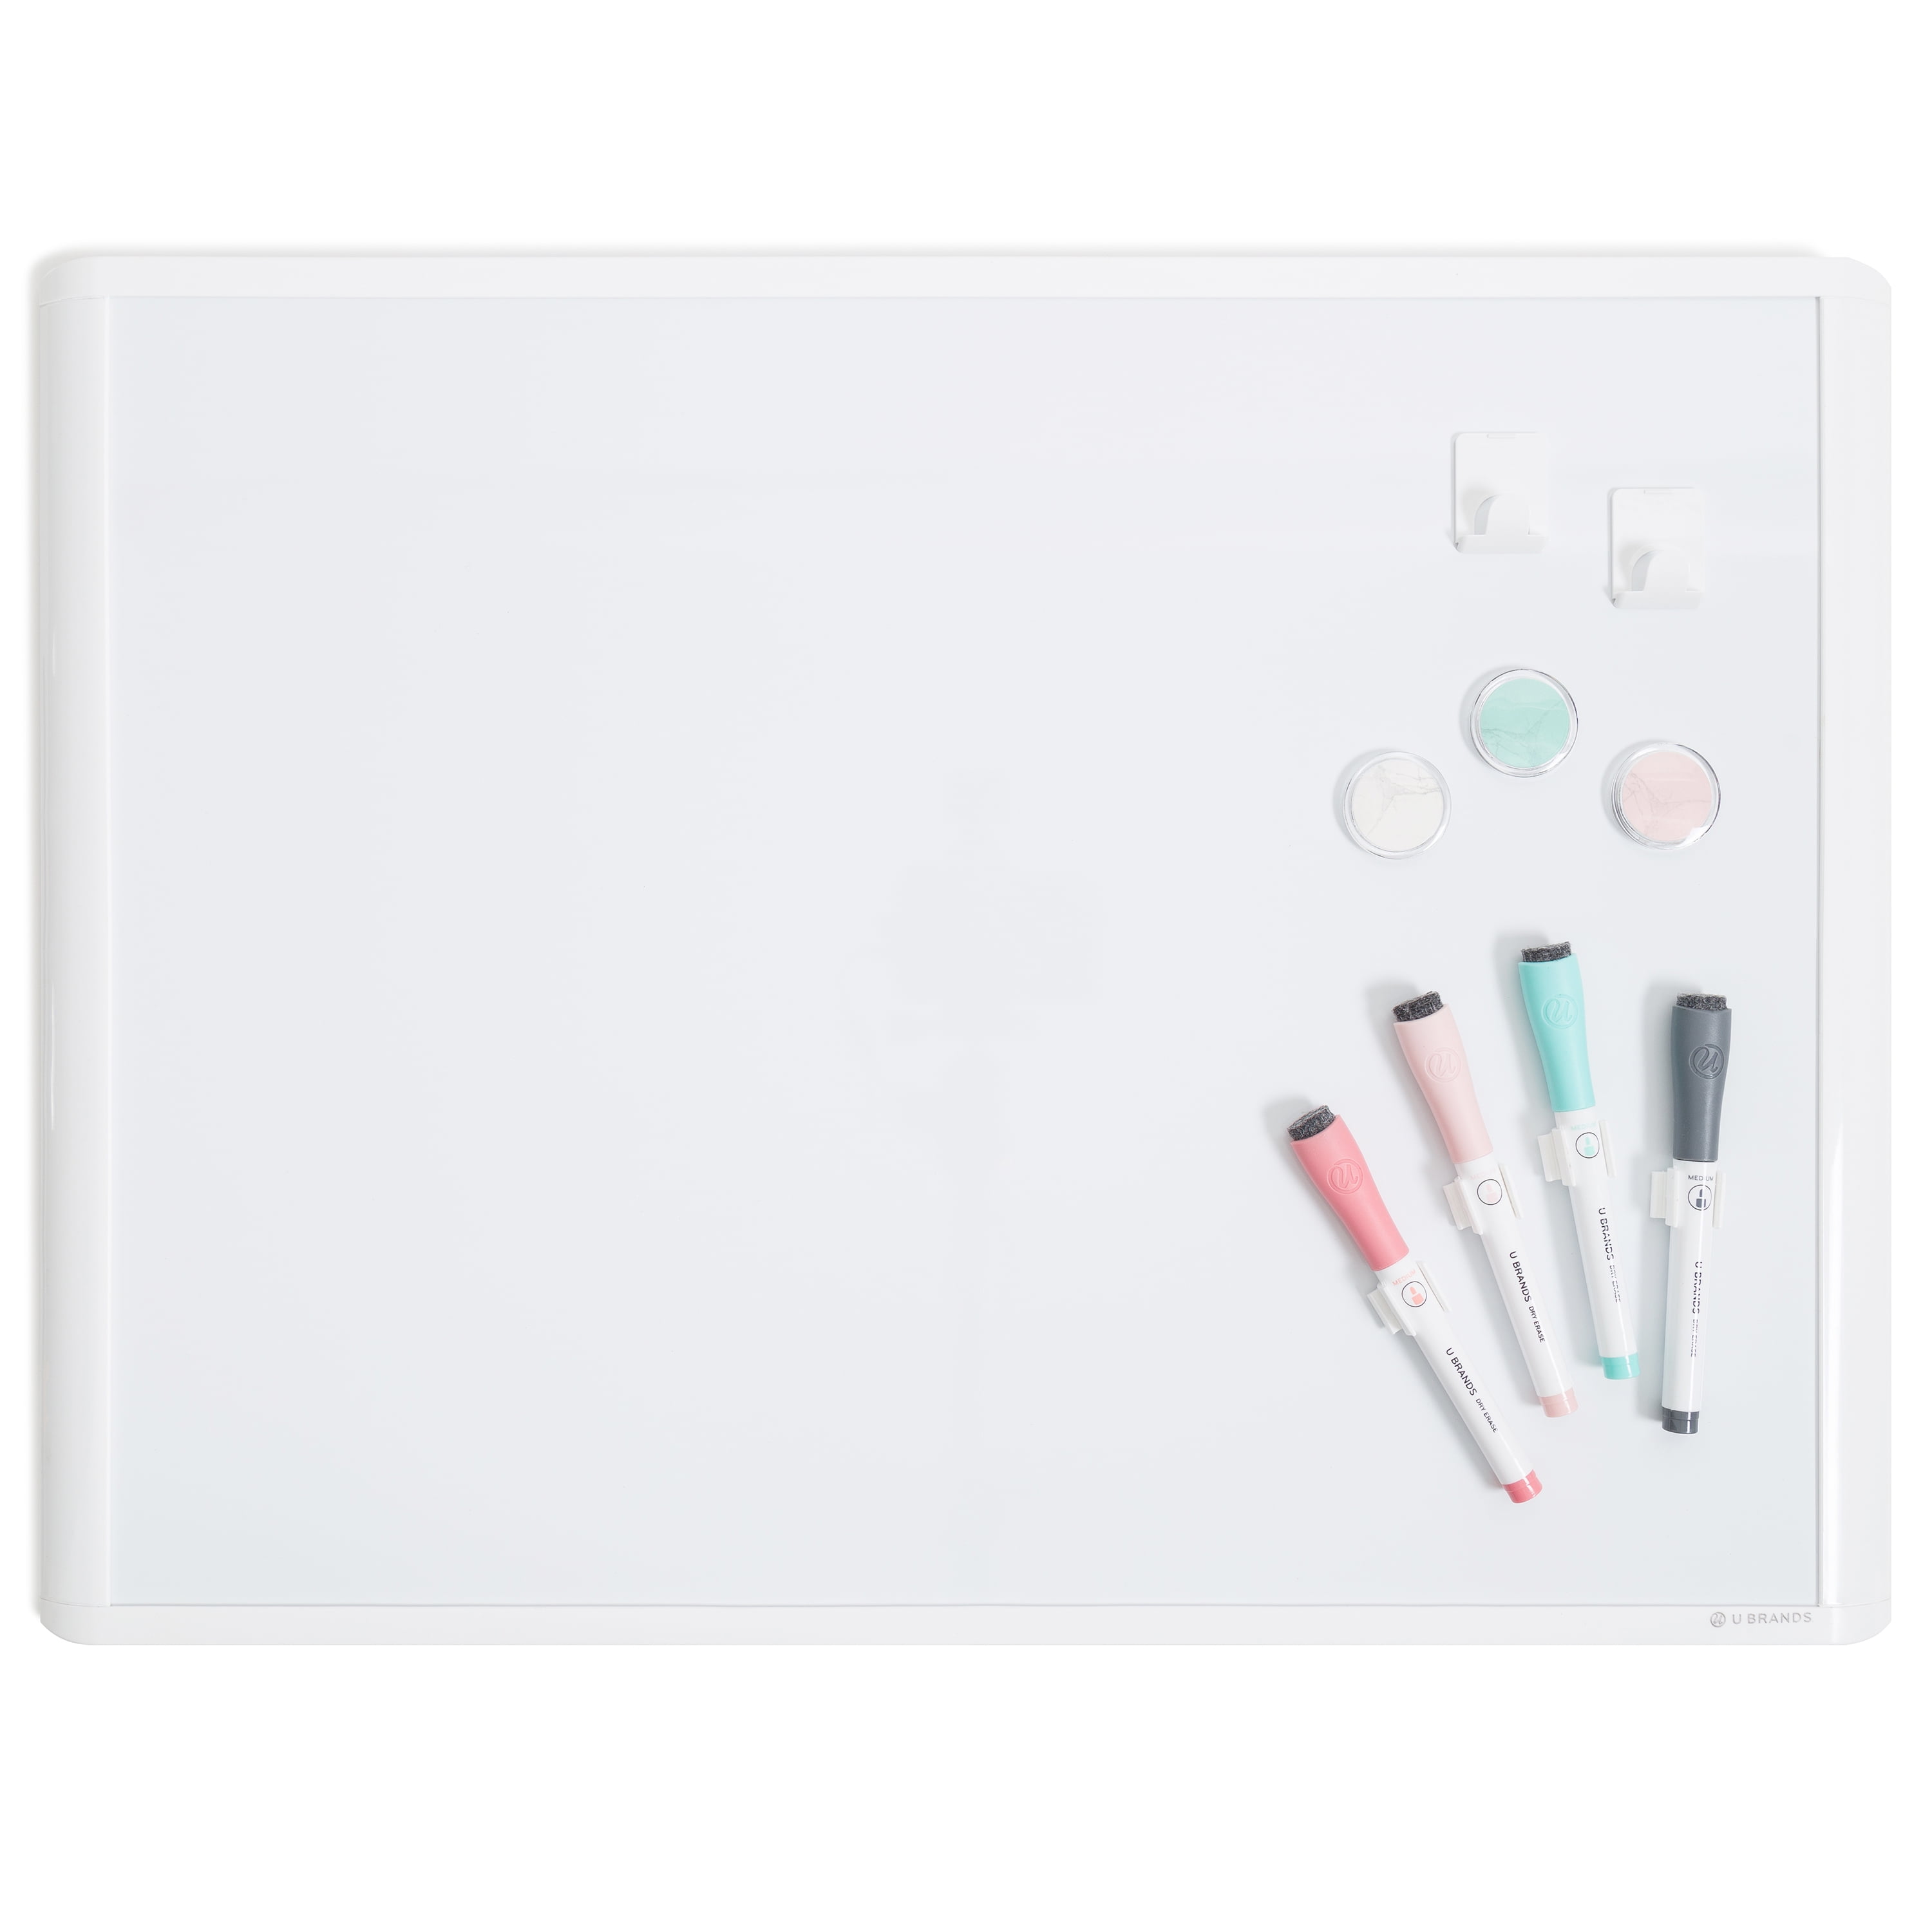 Charles Leonard 35036 Lapboard Class Pack Dry Erase Boards 9 X 12 White for sale online 